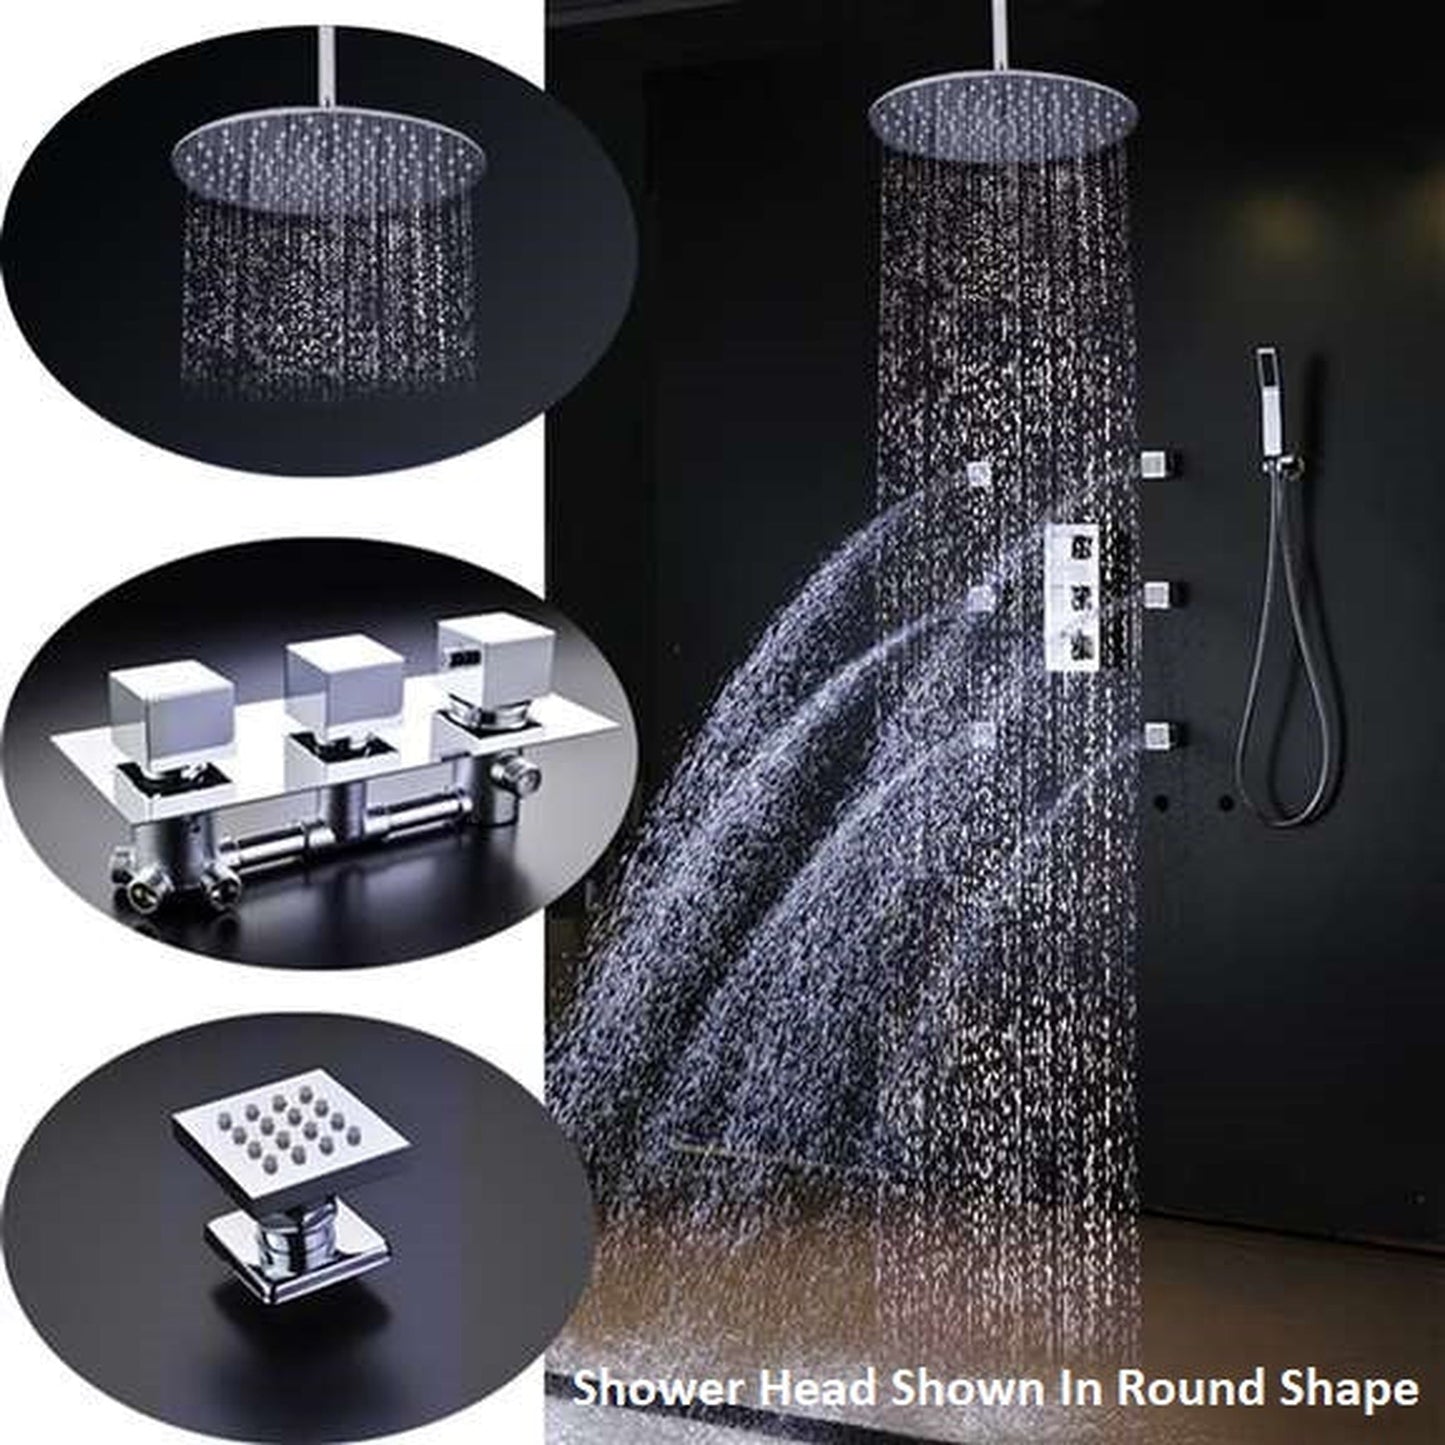 FontanaShowers Atlantic Creative Luxury 24" Large Chrome Square Ceiling Mounted Massage Shower System With Water Powered LED Lights, 6-Jet Body Spray and Hand Shower